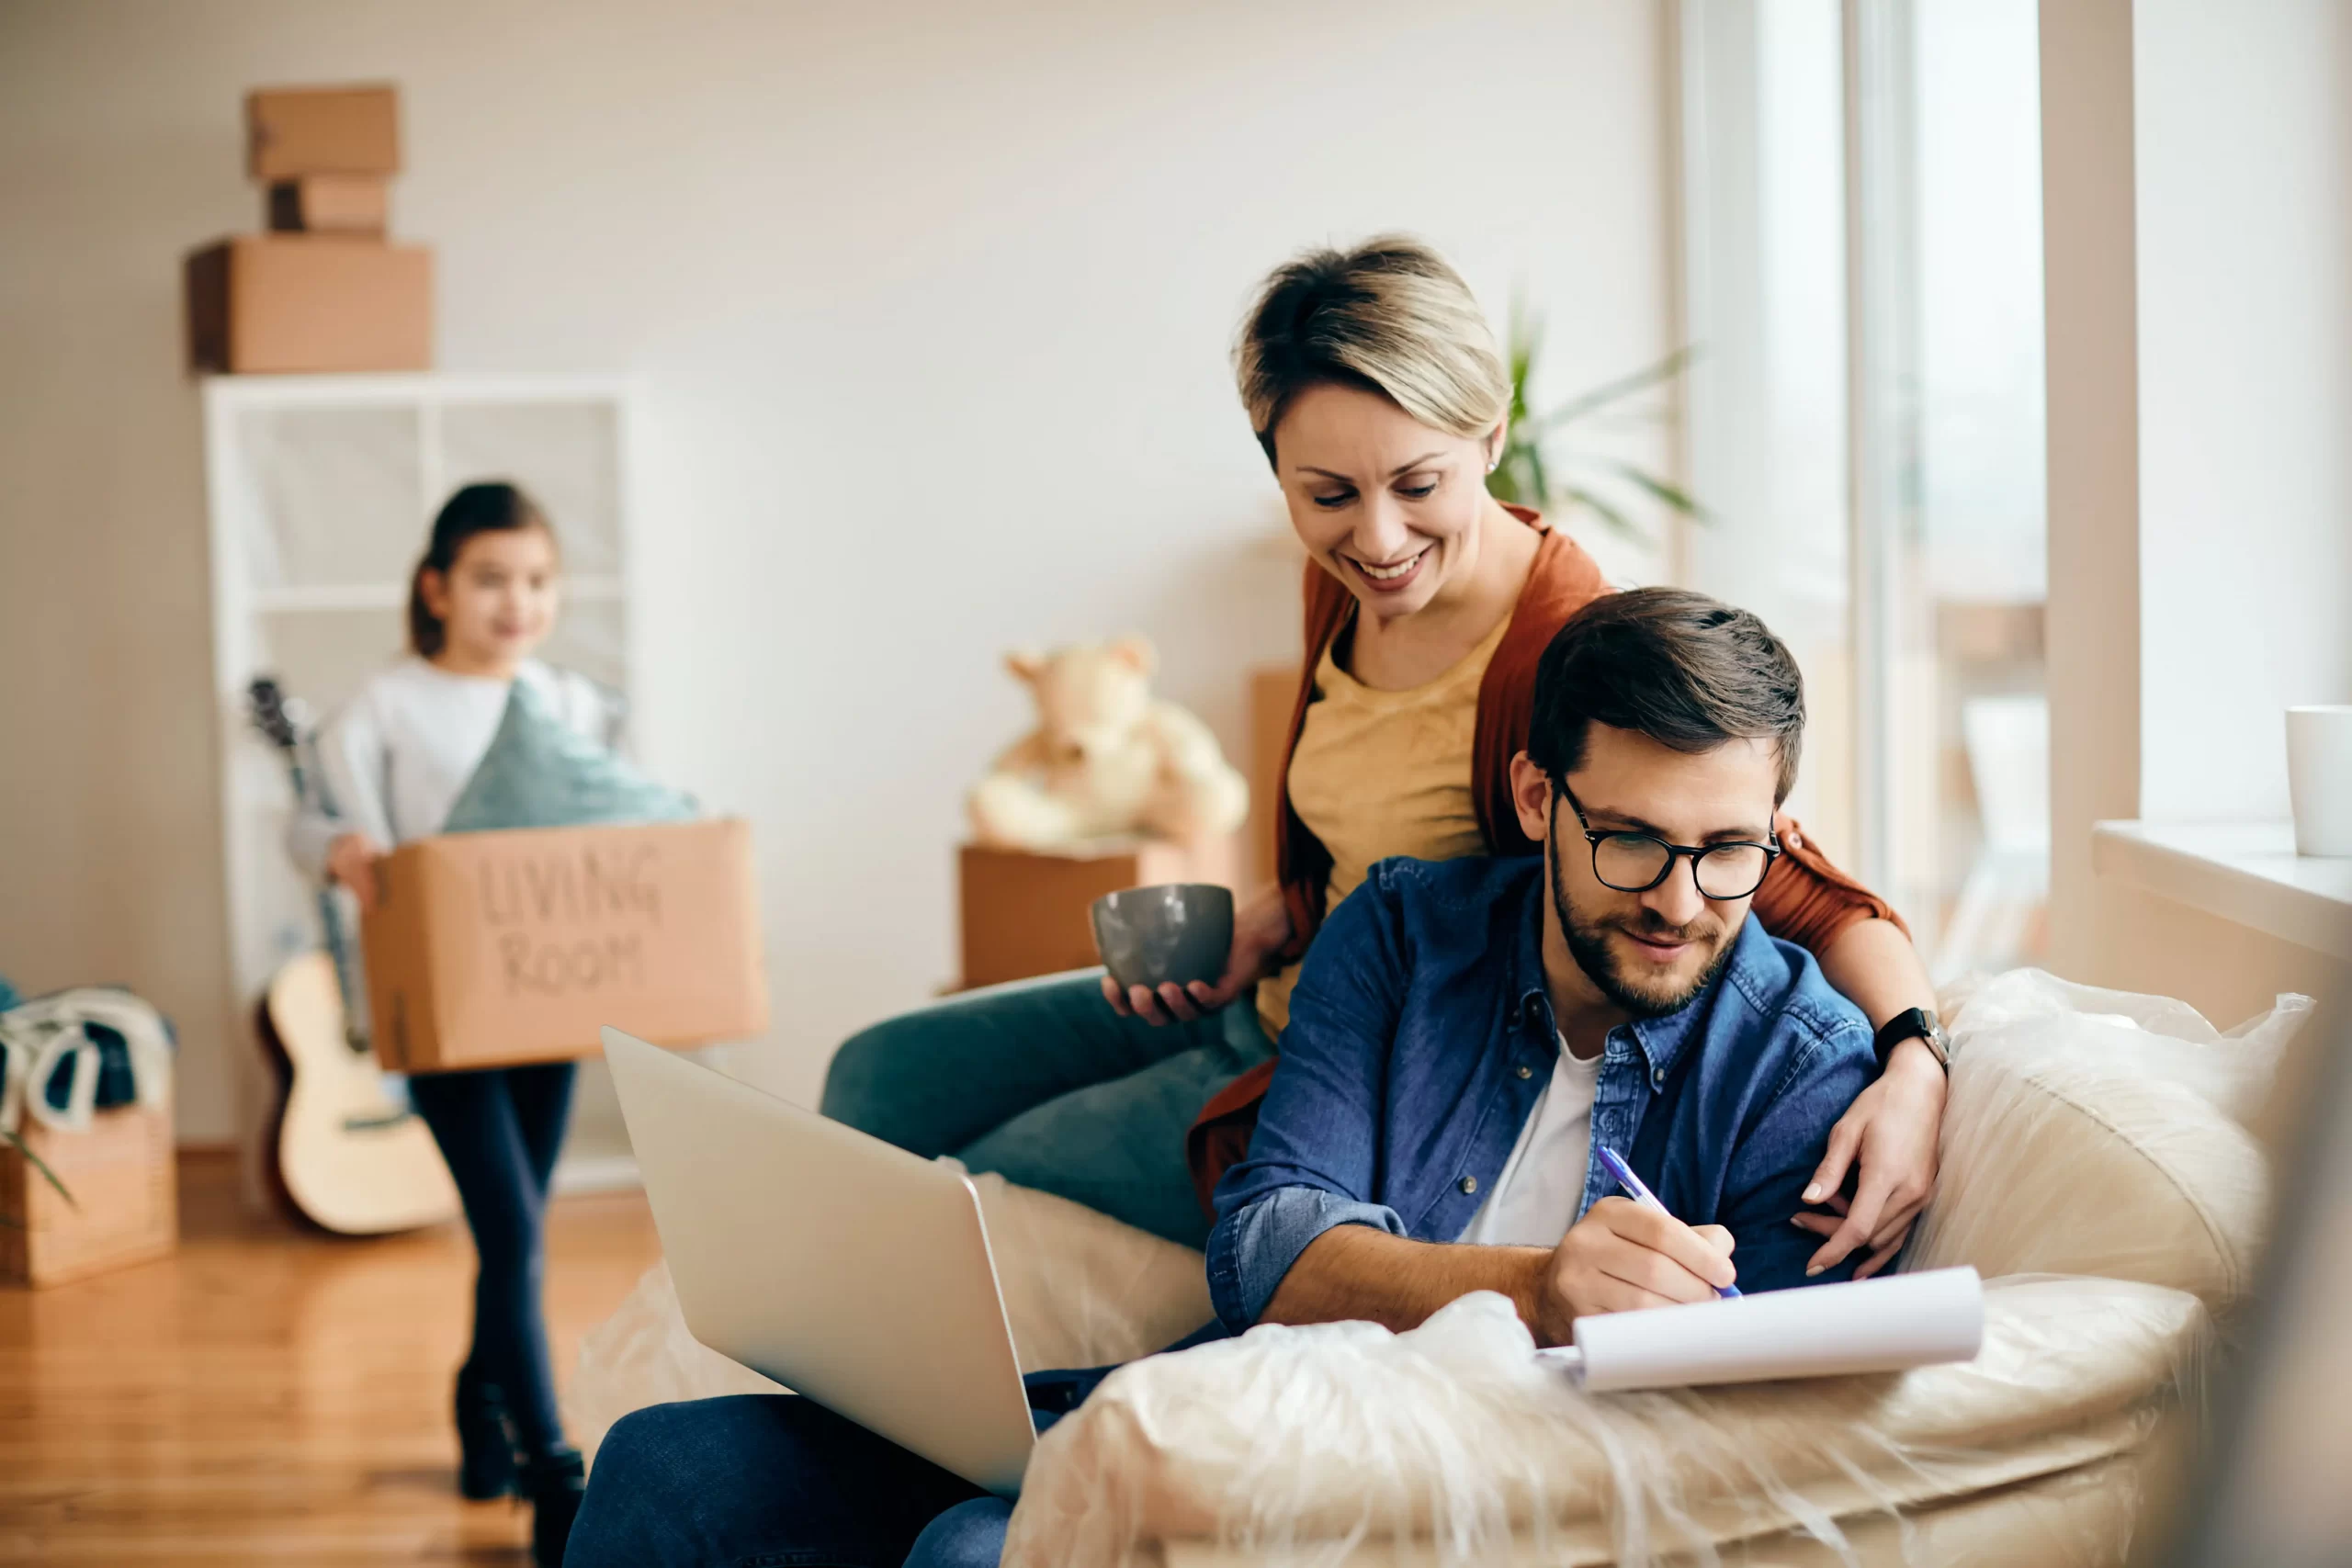 Here are Tips on What to Do After the Move